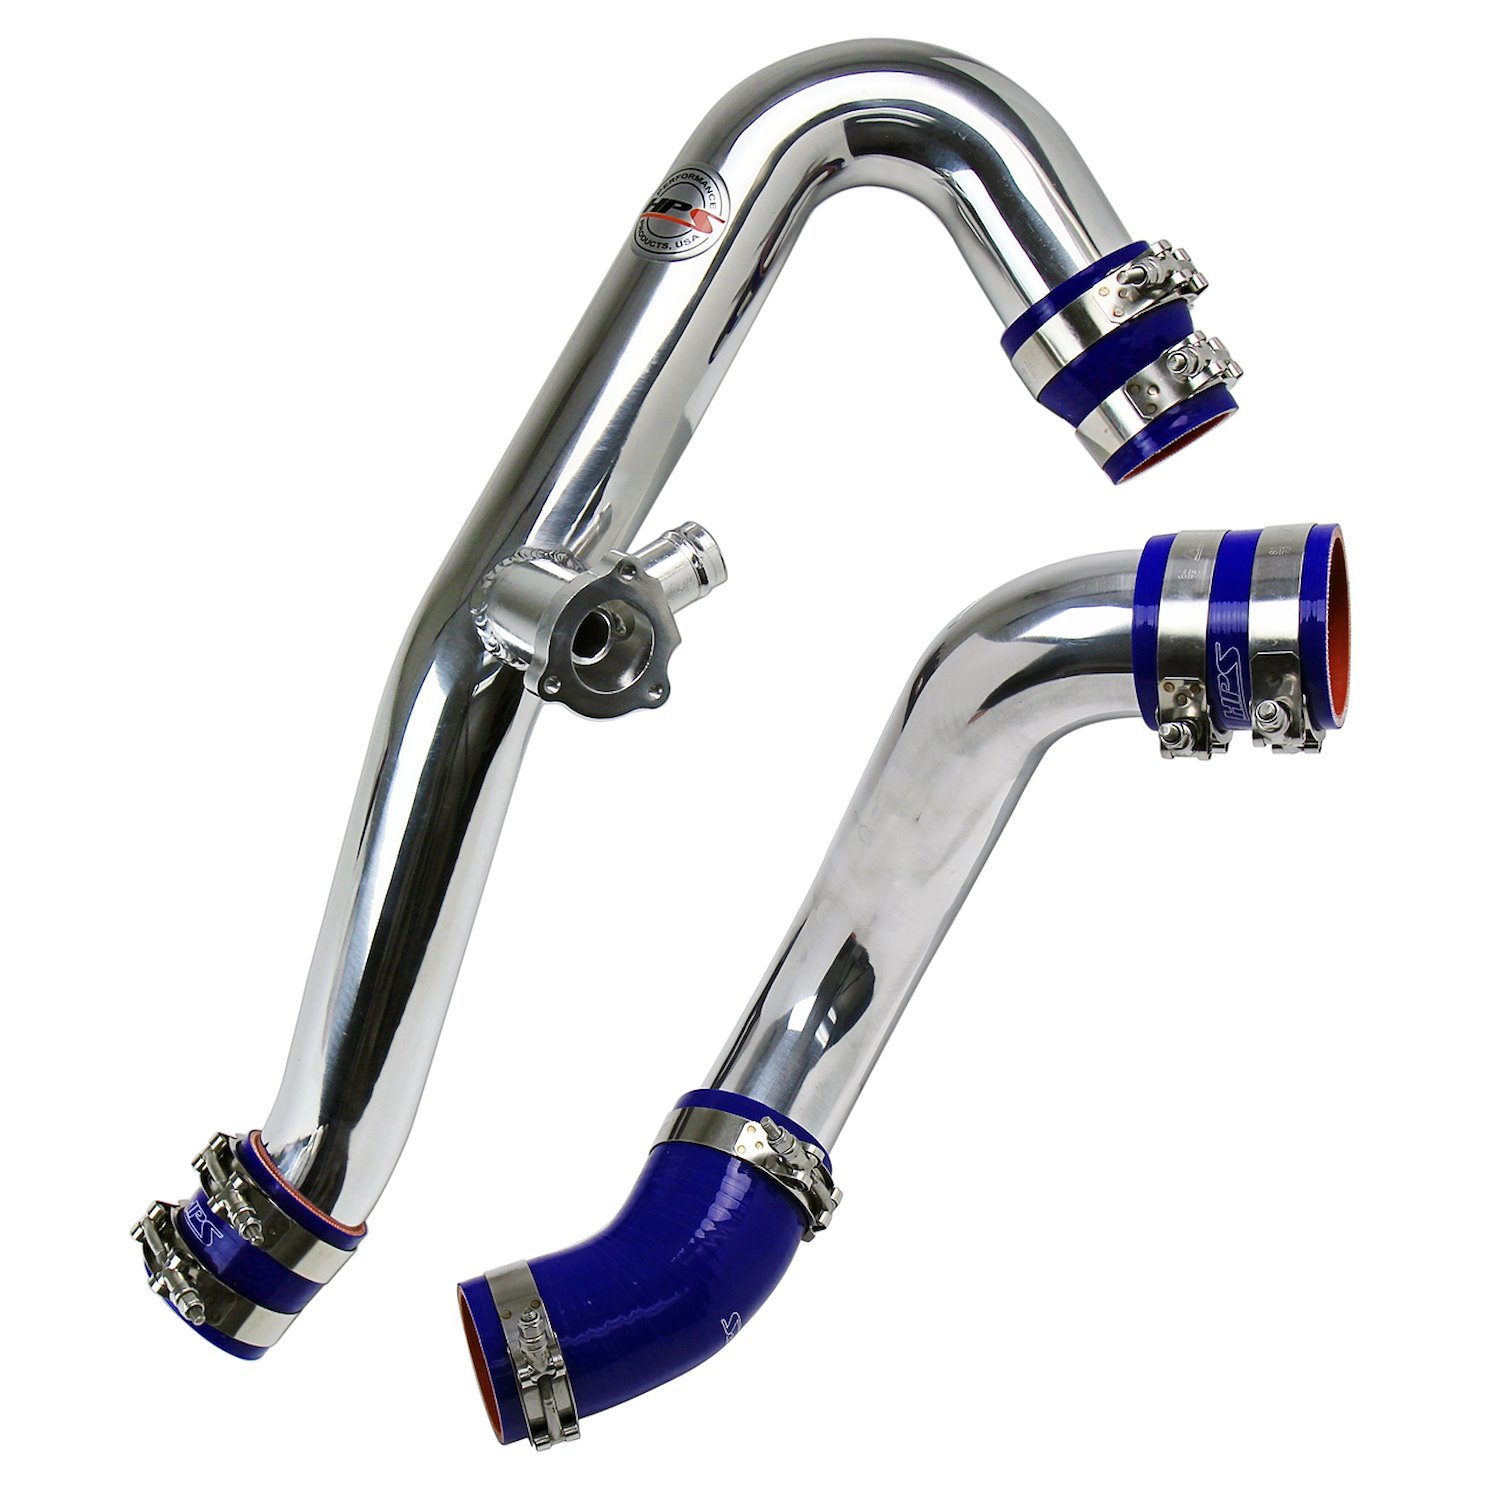 17-102P Turbo Charge Pipe Kit, Dyno Proven +17.1 HP, +16.9 TQ, Reduce Turbo Lag, 2.75 in. Pipe